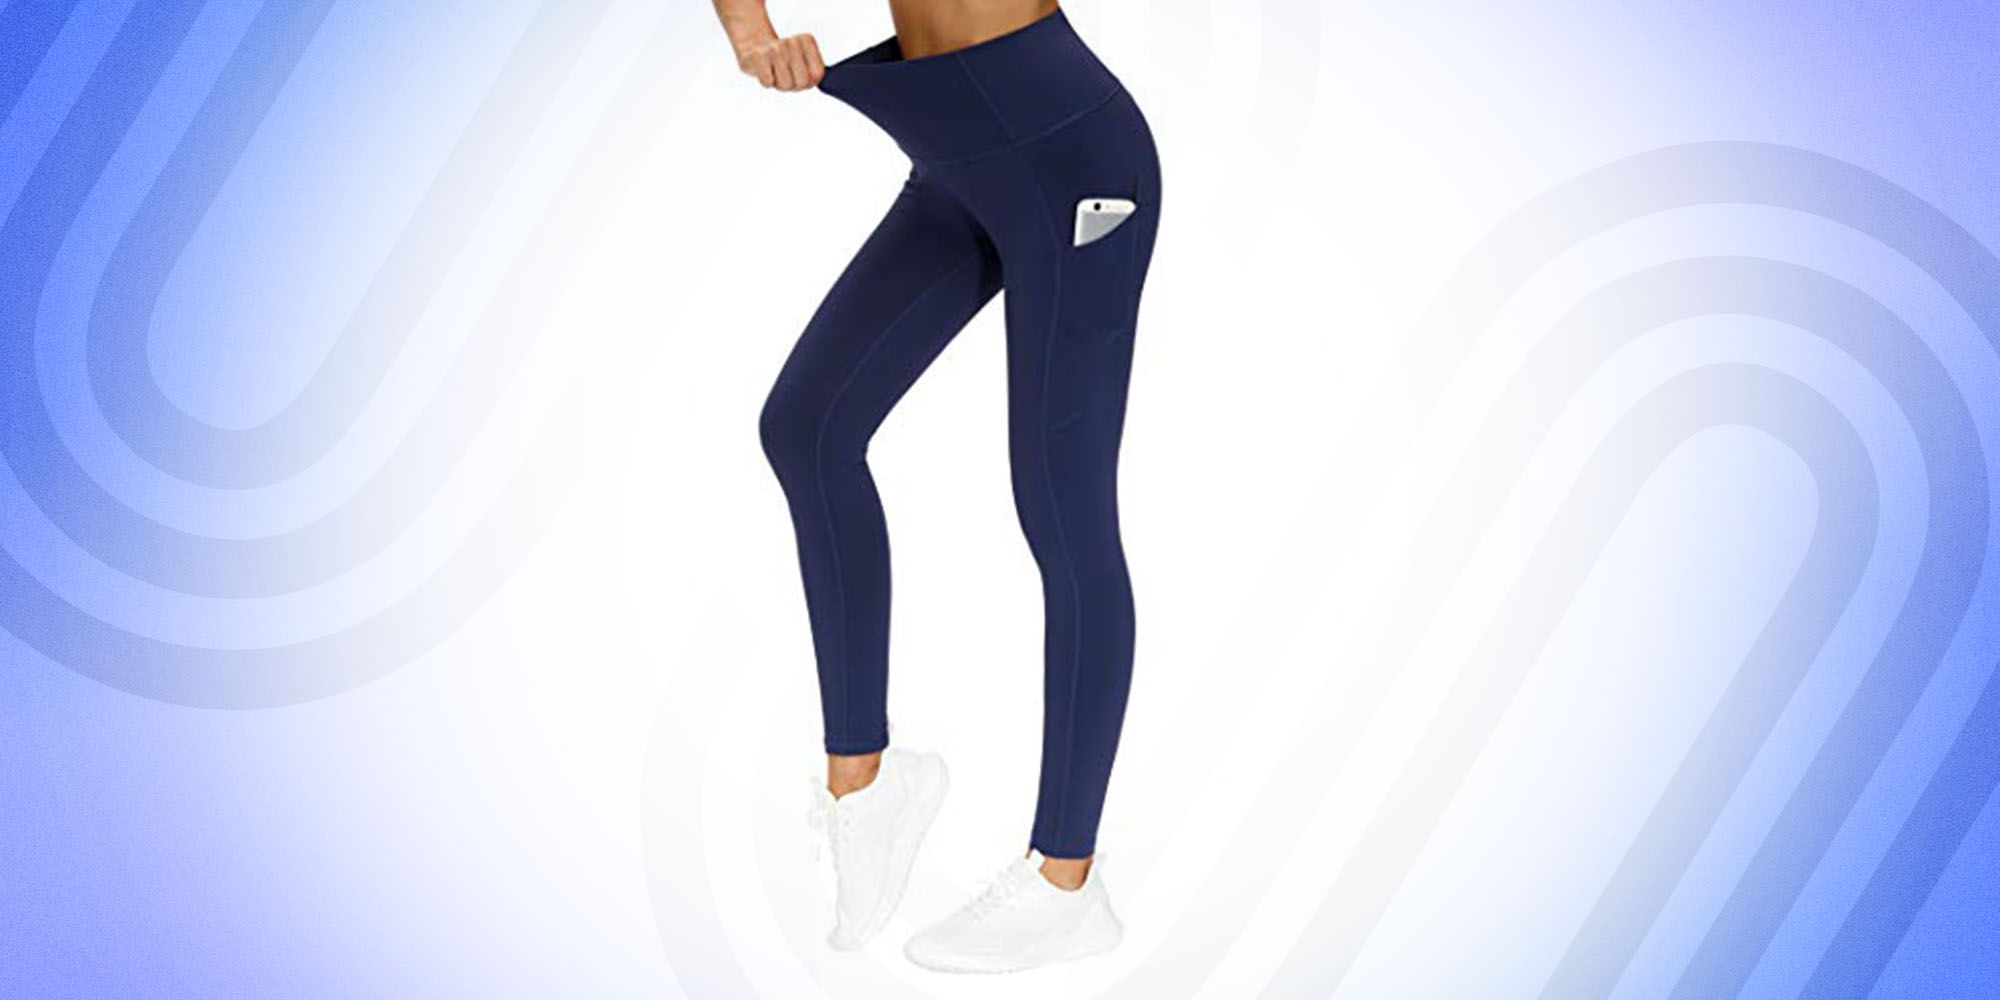 Womens Hip Lifting Yoga Gym Leggings With Pockets For Fitness, Running, And Gym  Workouts Push Up, Sporty, Affordable H1221 From Mengyang10, $7.11 |  DHgate.Com